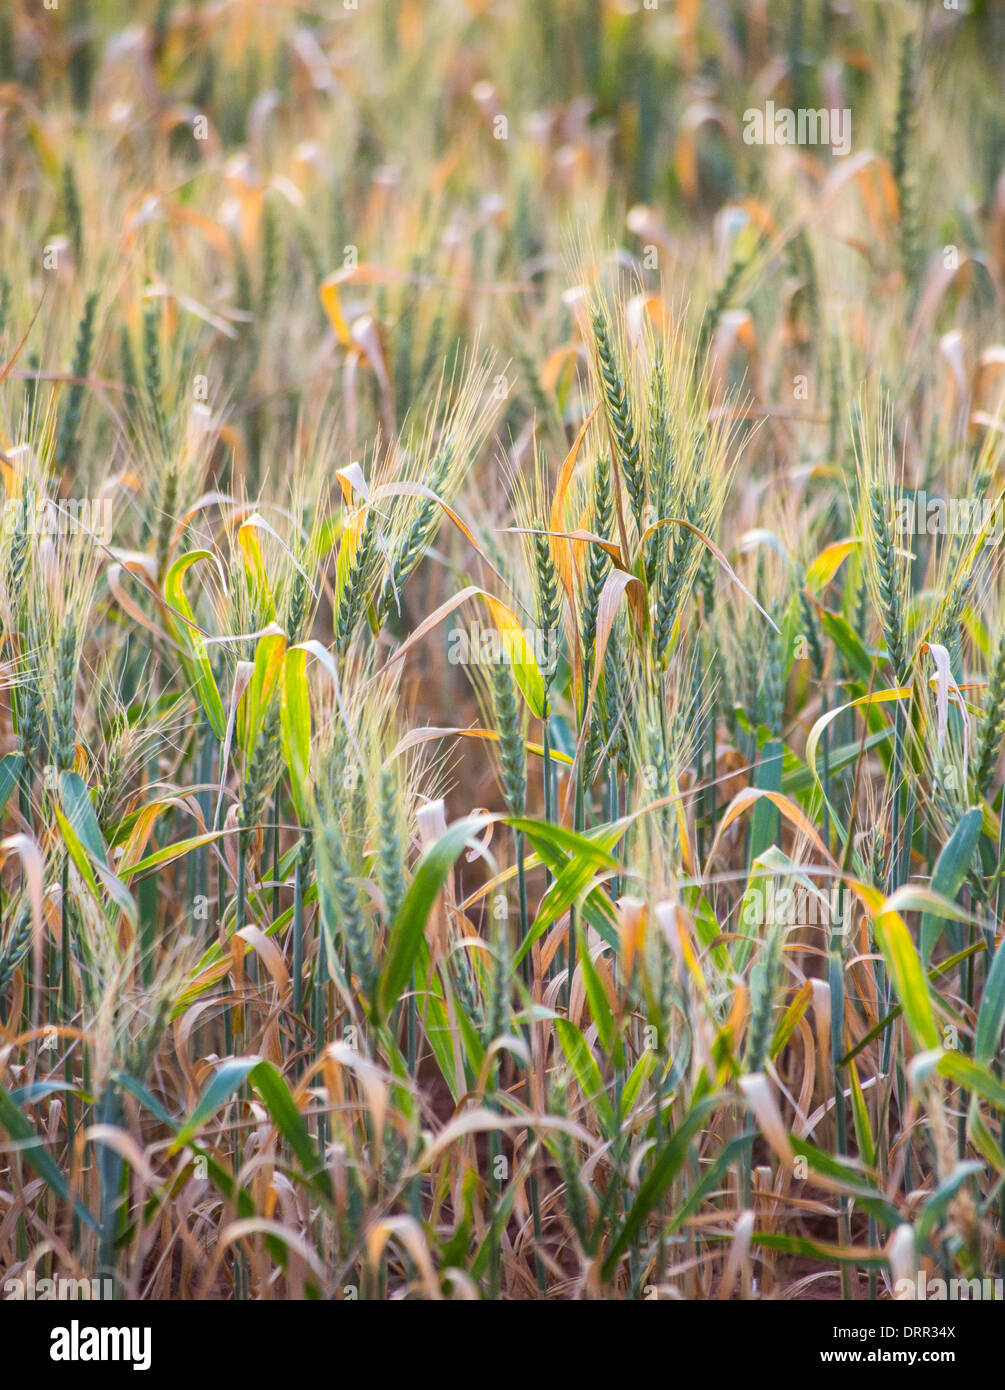 Wheat growing in a field in warm afternoon light, near Griffith, NSW, Australia Stock Photo